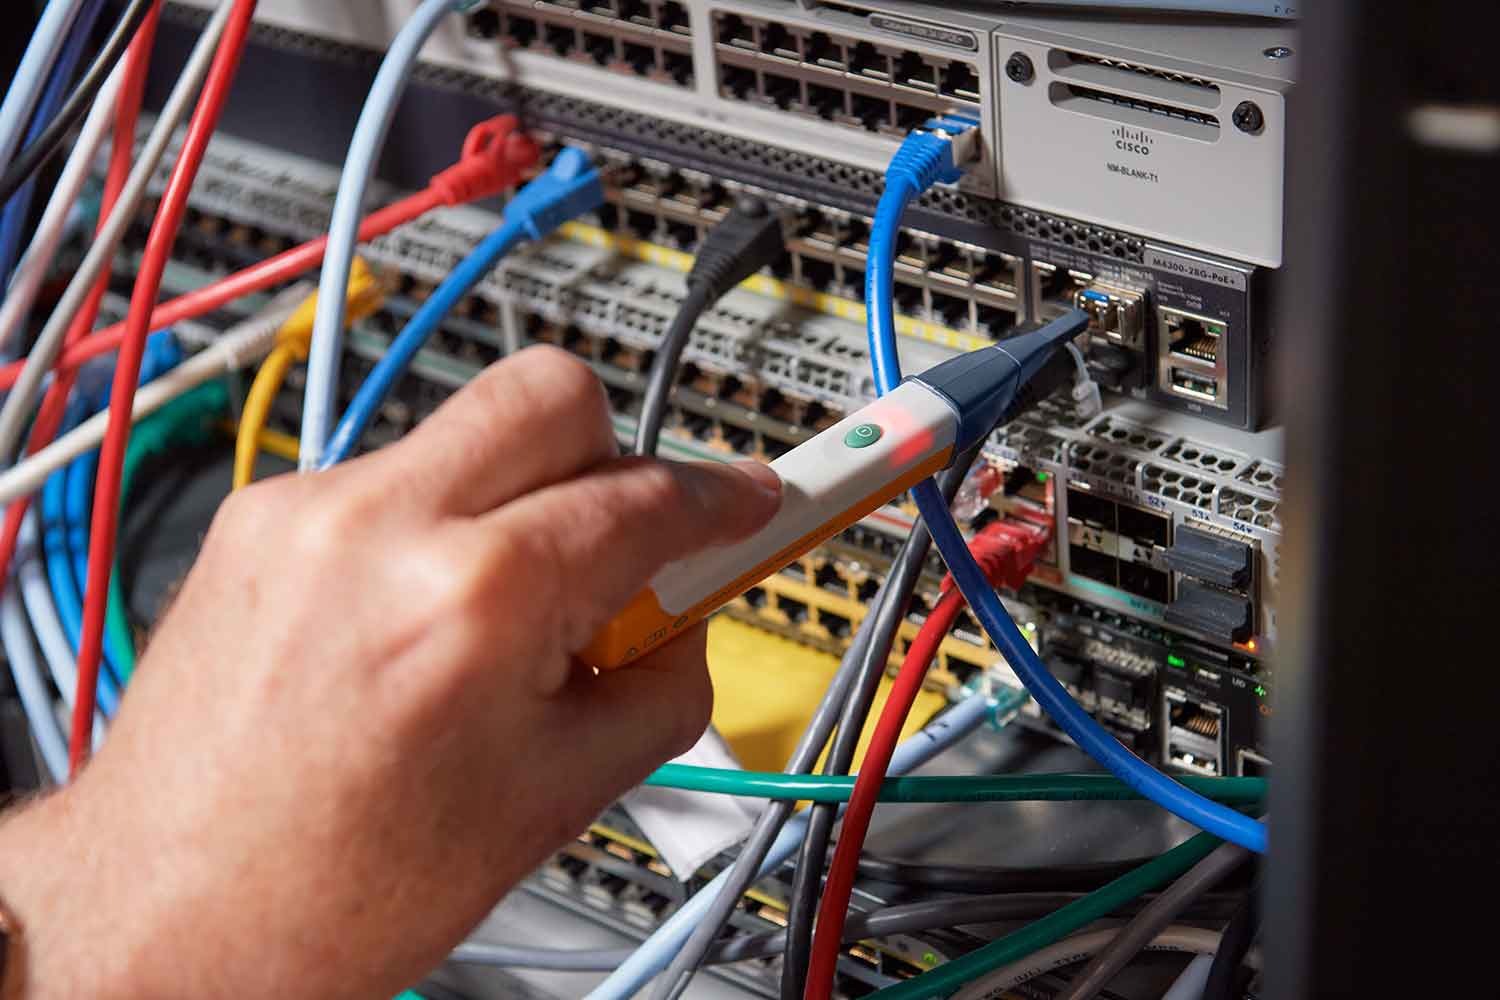 networking - What does single flashing LED on Ethernet cable tester  indicate? - Super User